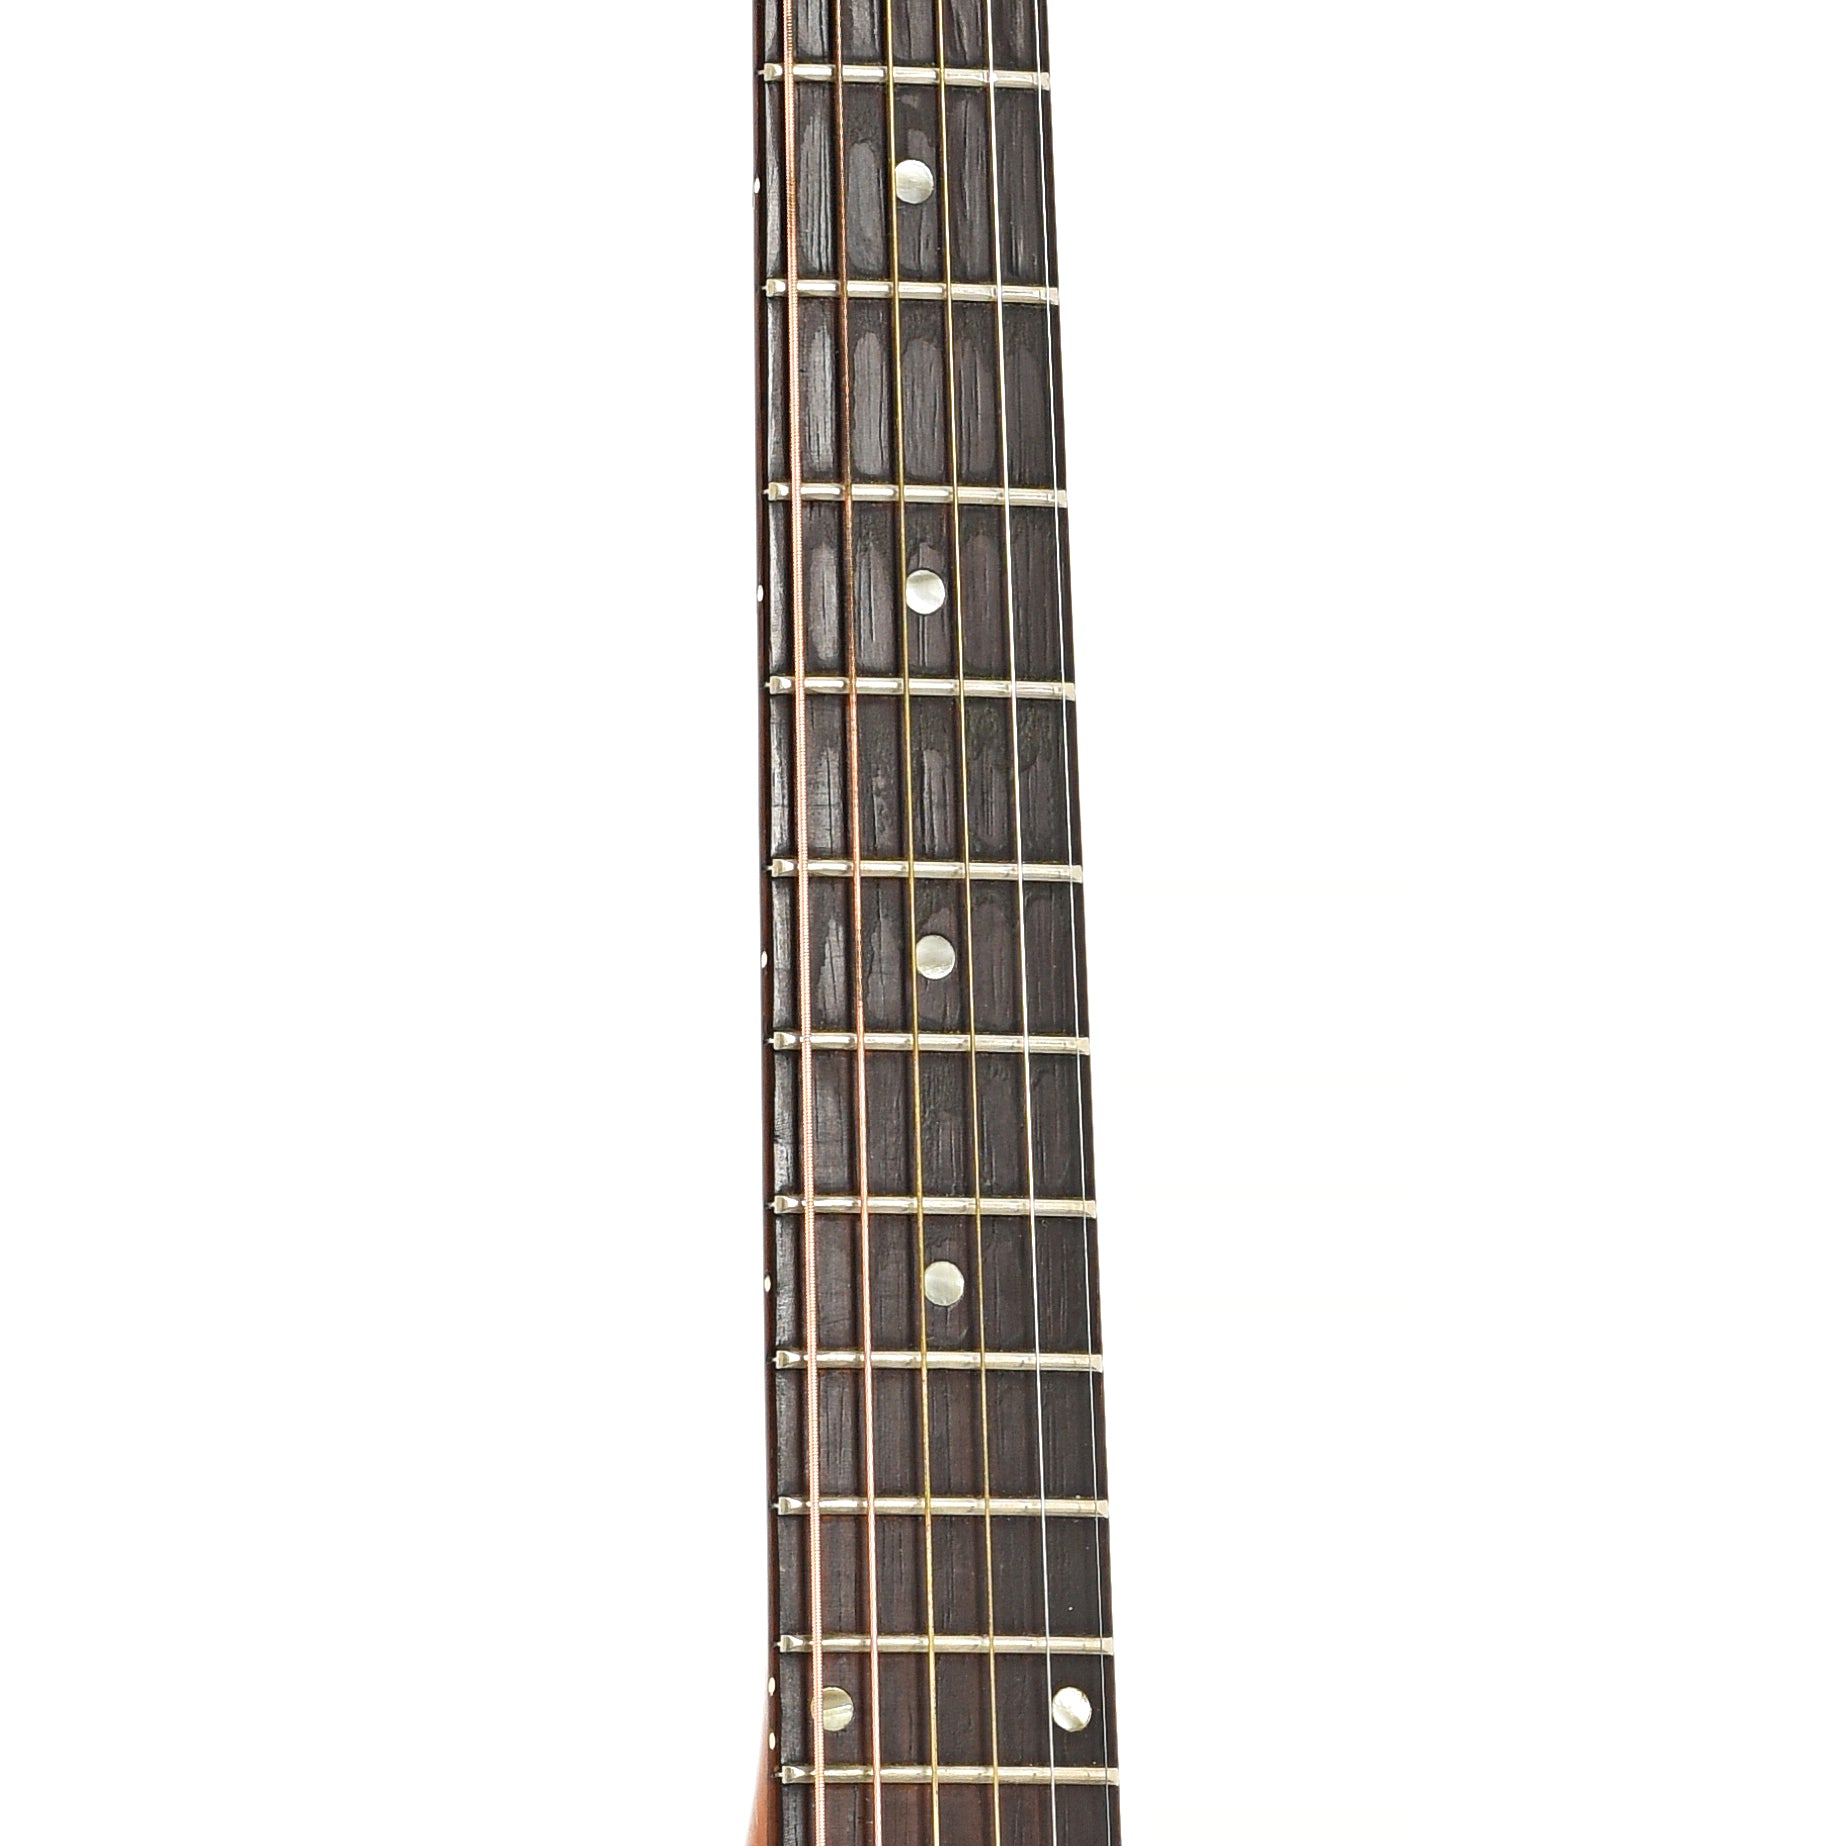 Fretboard of Gibson LG-0 Acoustic Guitar